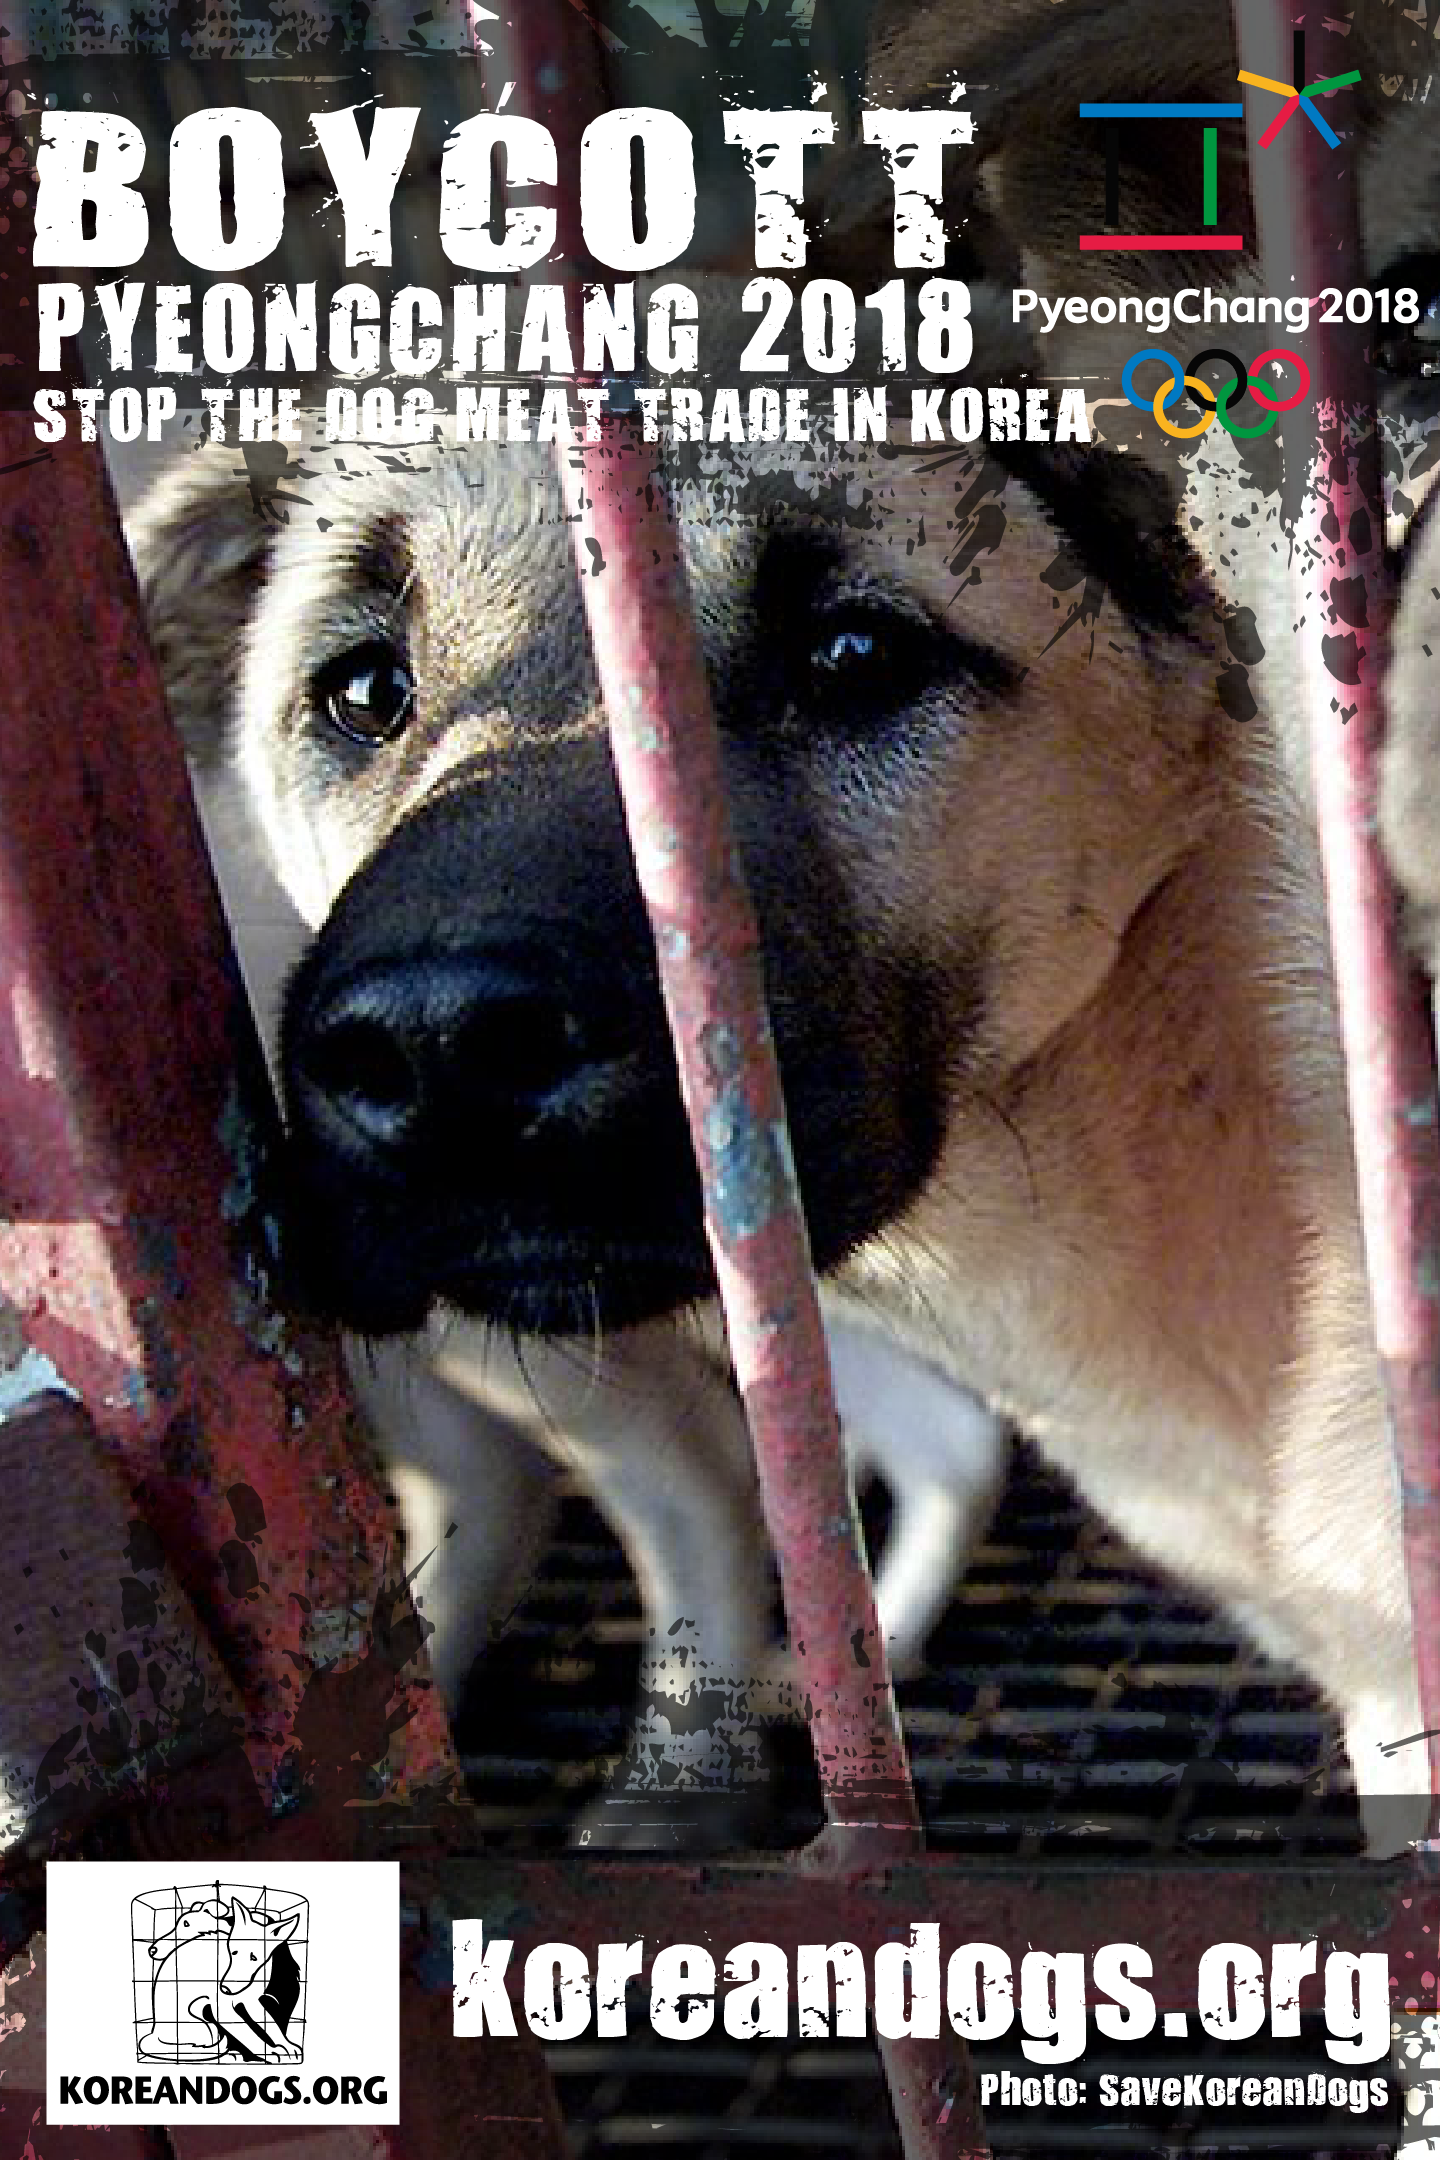 https://koreandogs.org/noc-take-a-stand/?utm_source=sendinblue&utm_campaign=New_Calls_for_Action!__Korean_government_petition_and_more&utm_medium=email